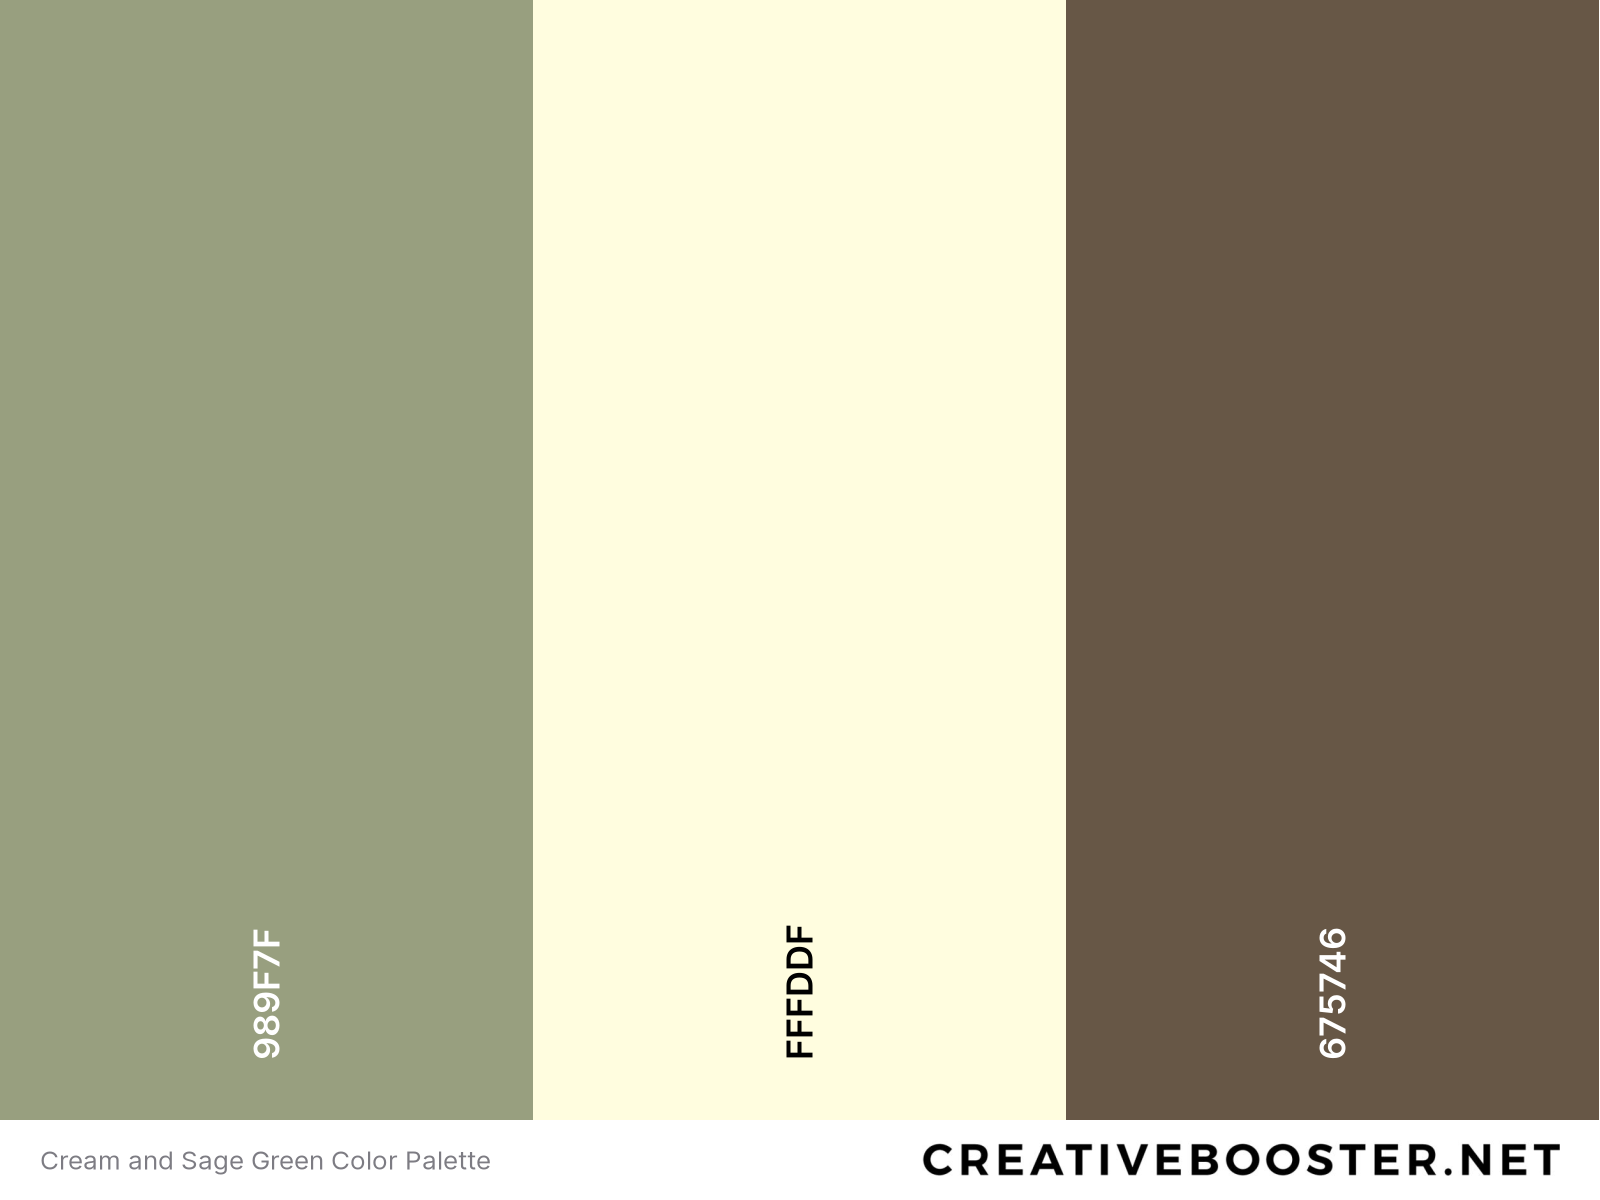 Cream and Sage Green Color Palette